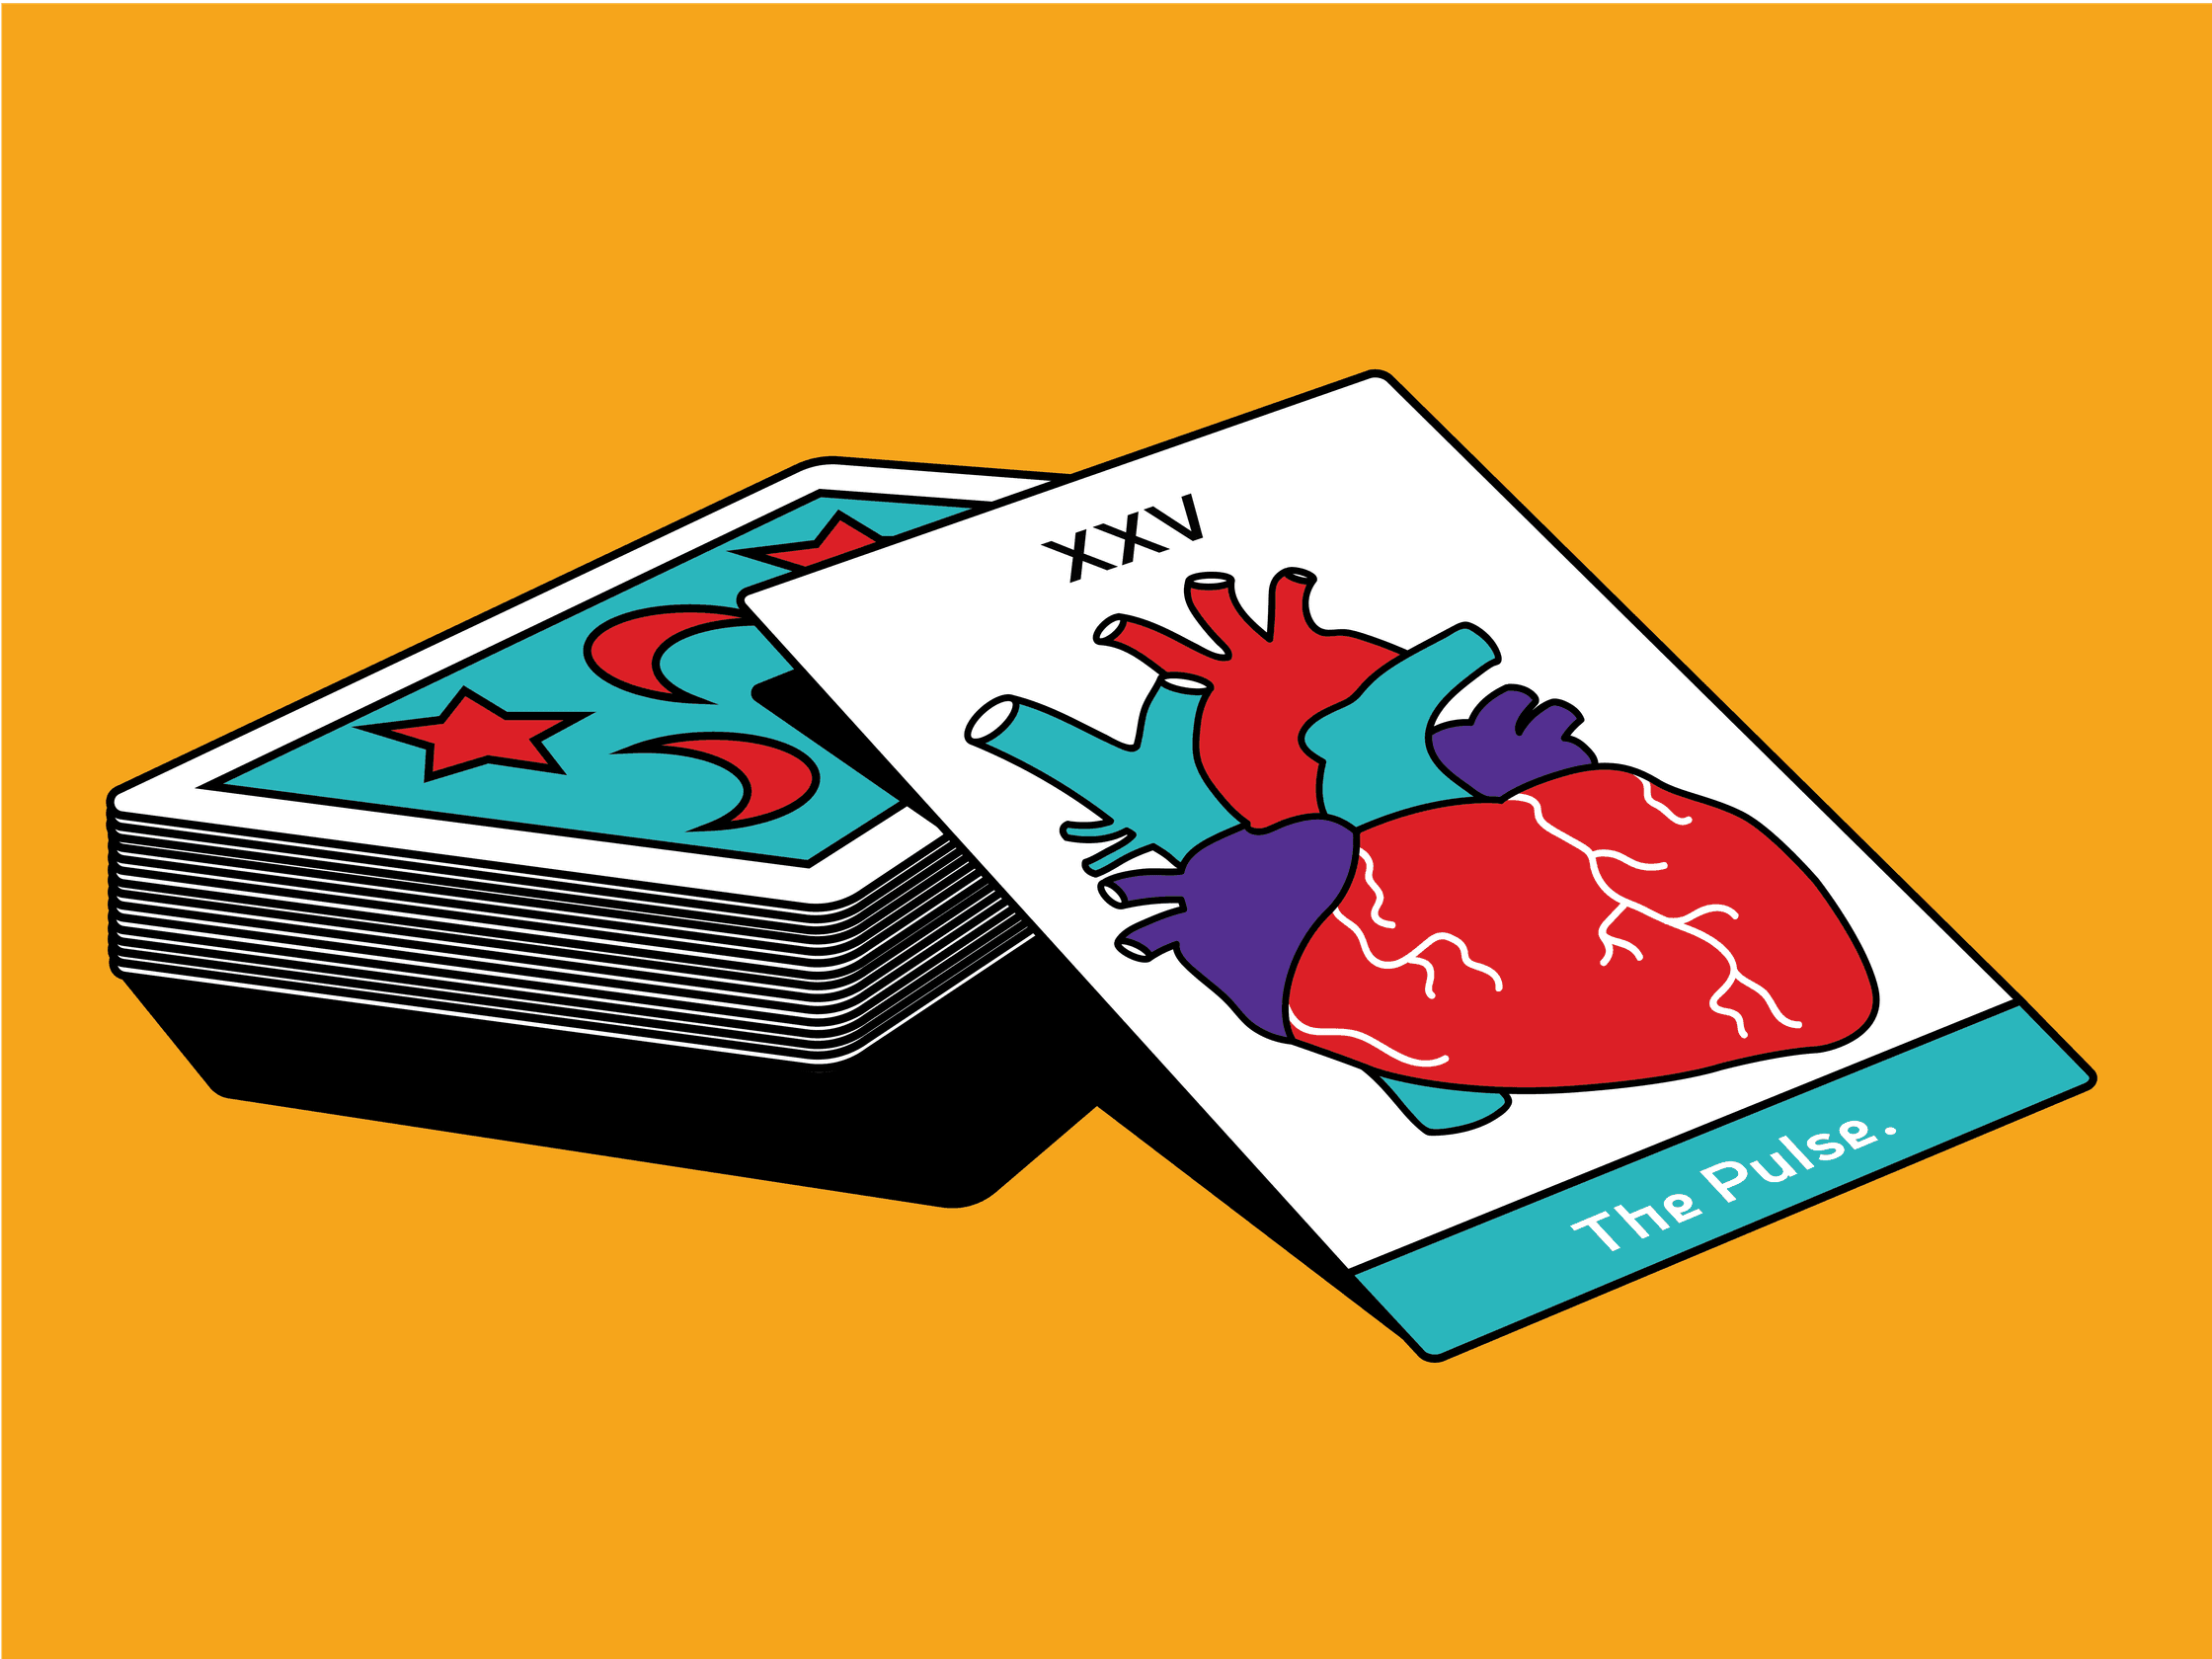 Heartbeat fortune-telling card visual